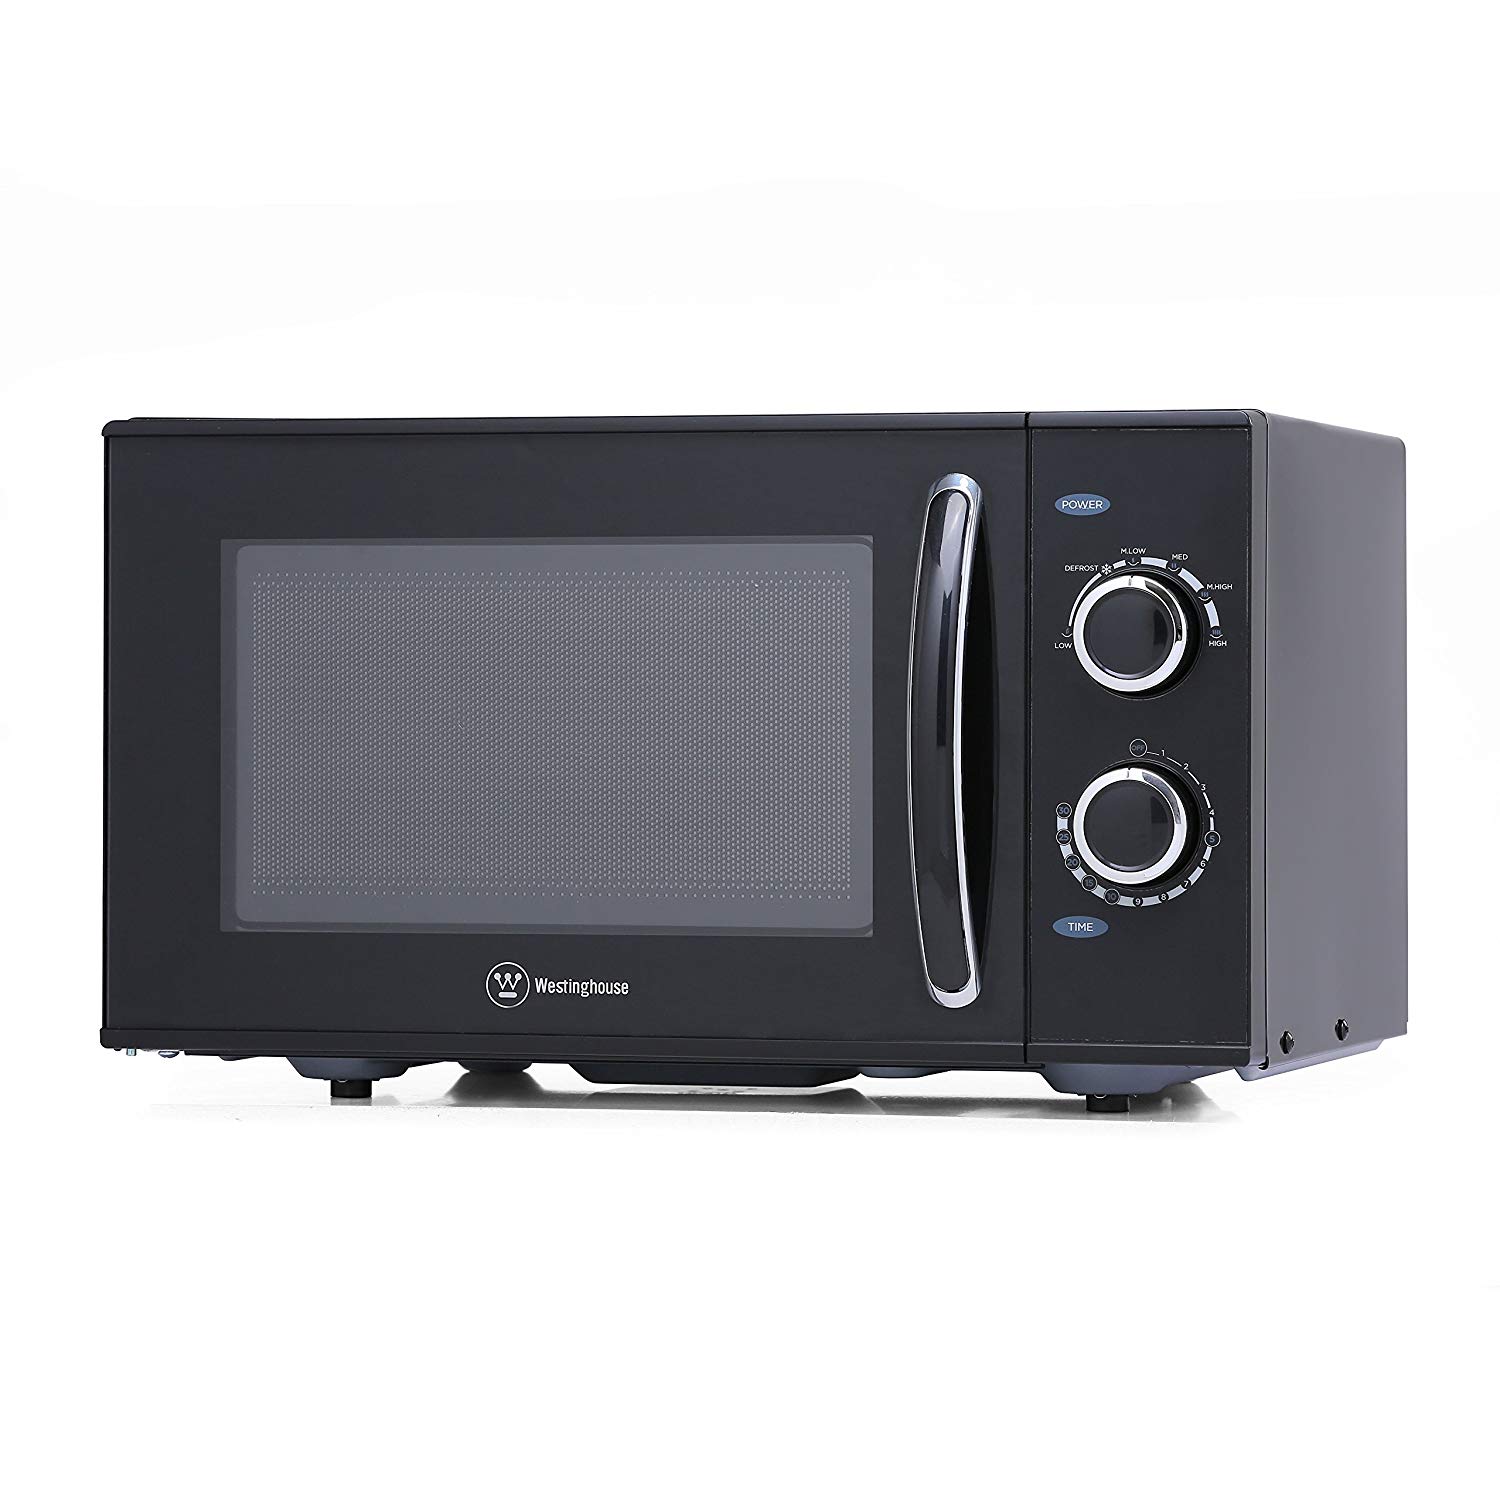 Westinghouse WCMH900B Microwave Review